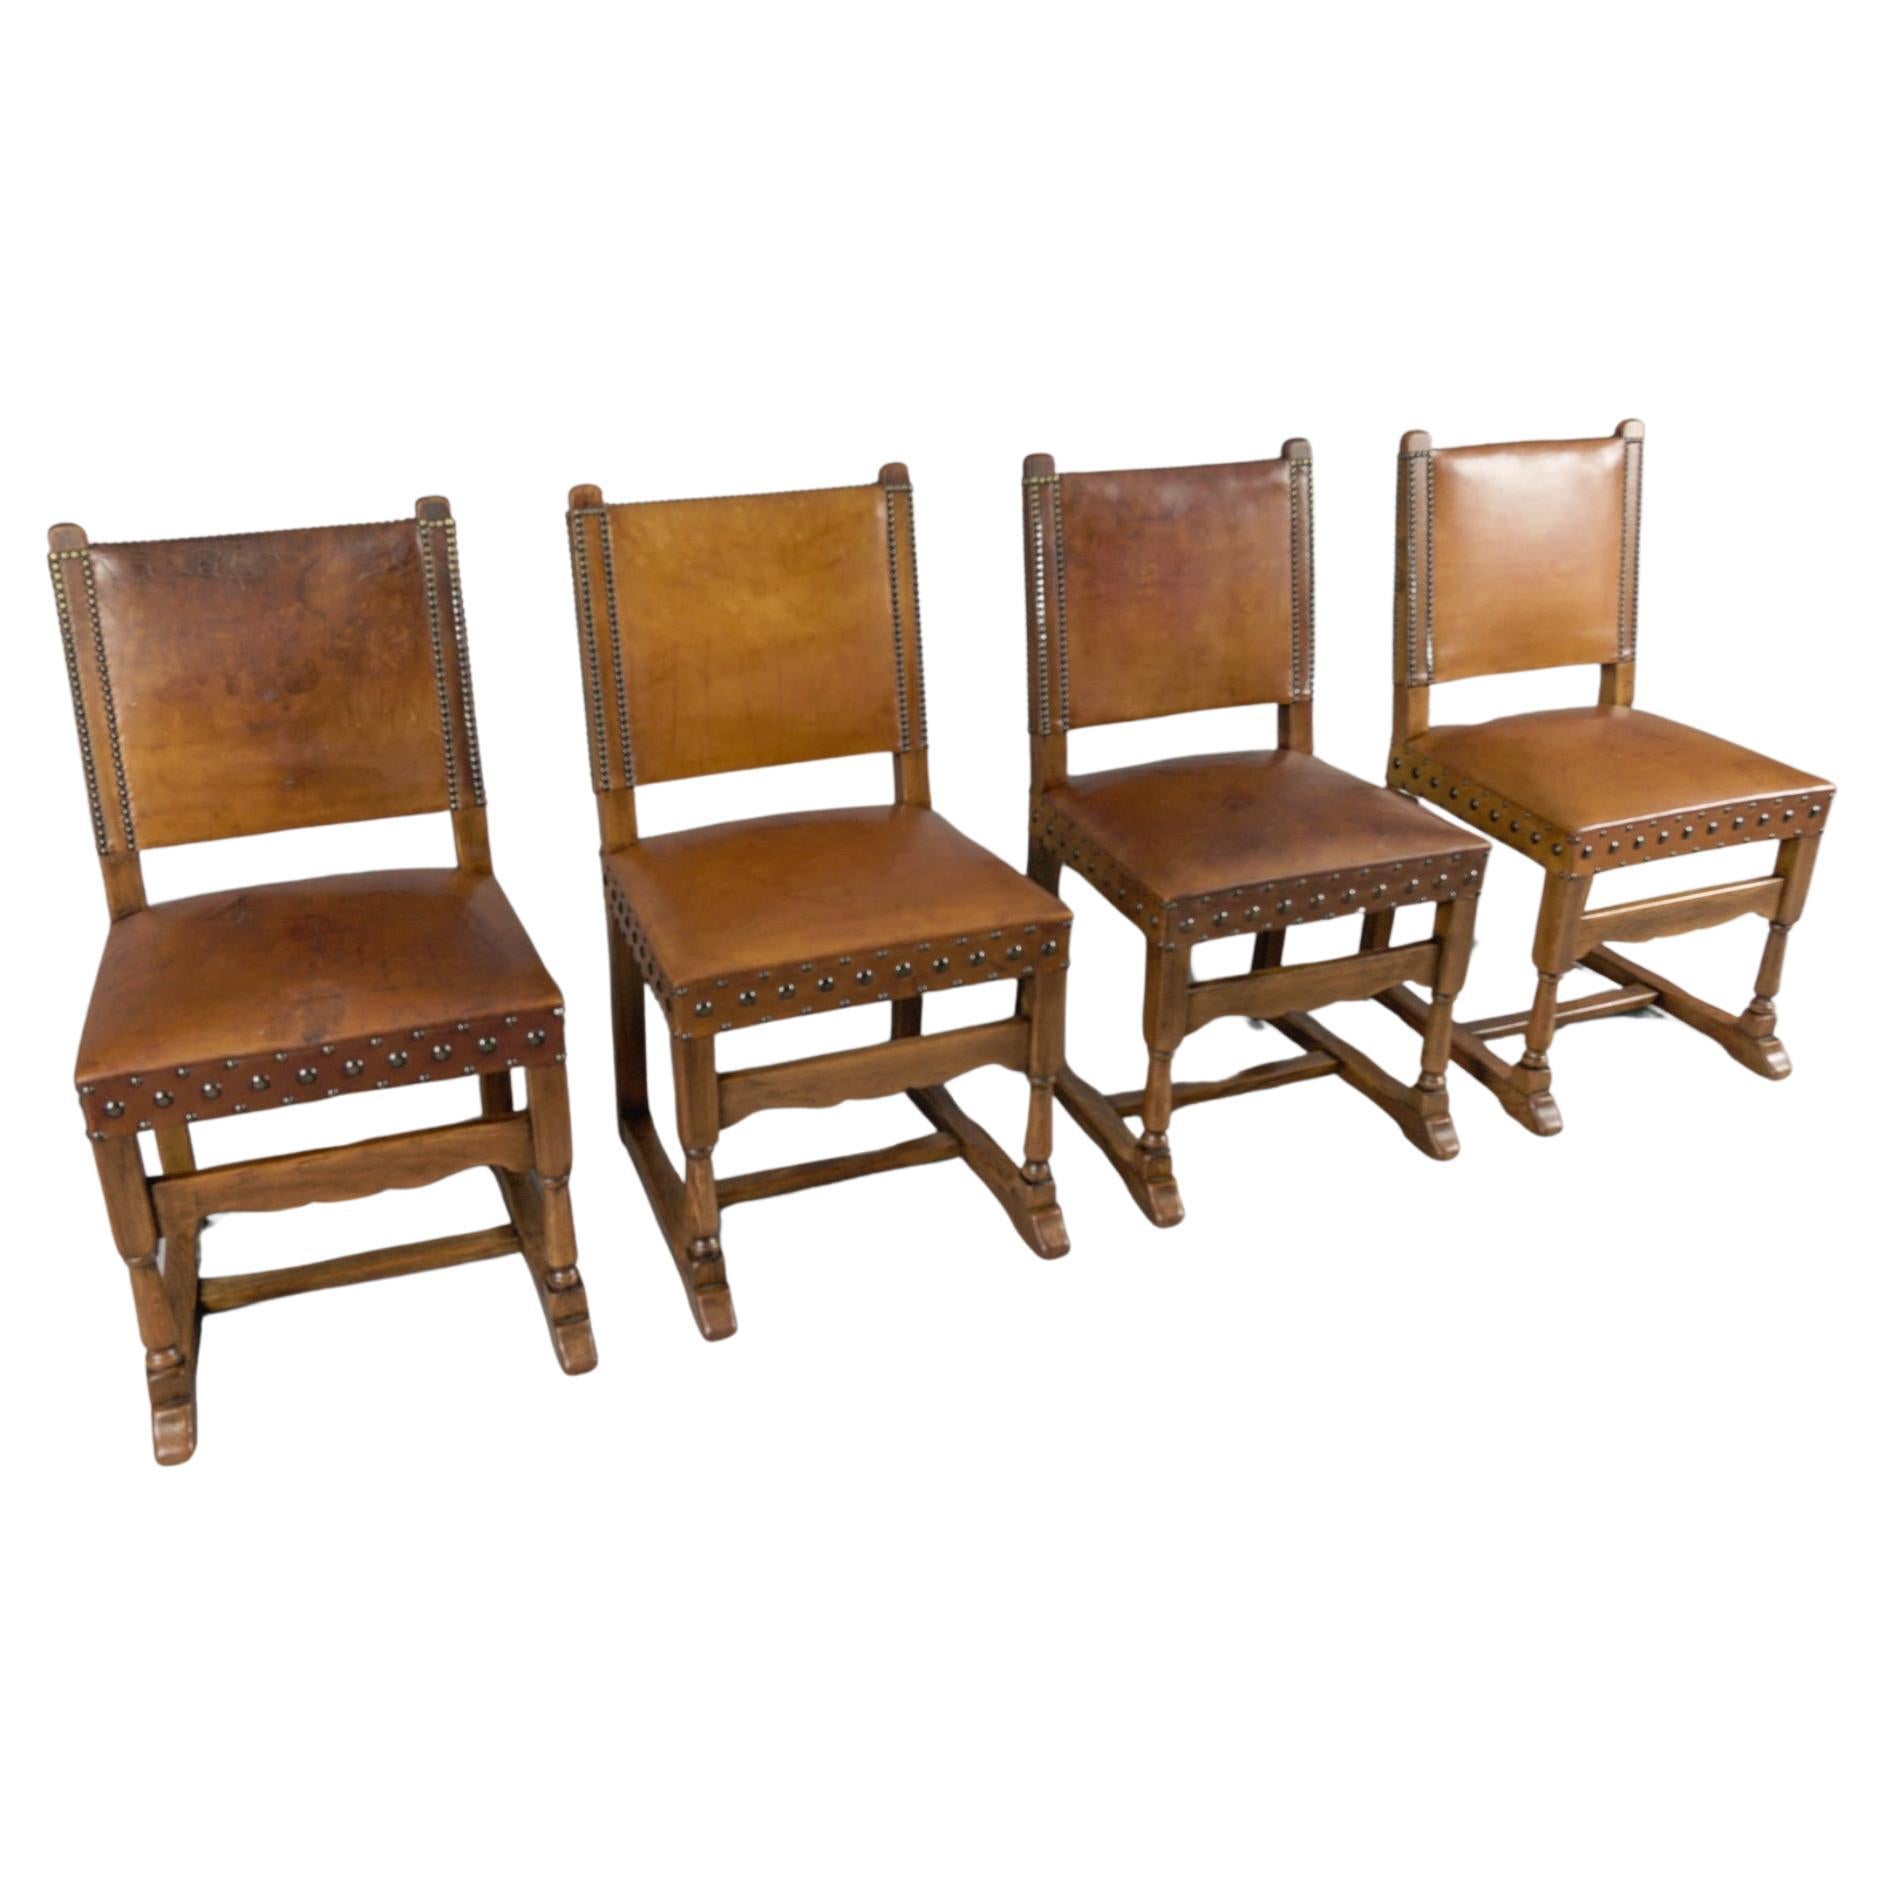  Spanish Leather and Wood Chairs, 1940s, Set of 4 For Sale